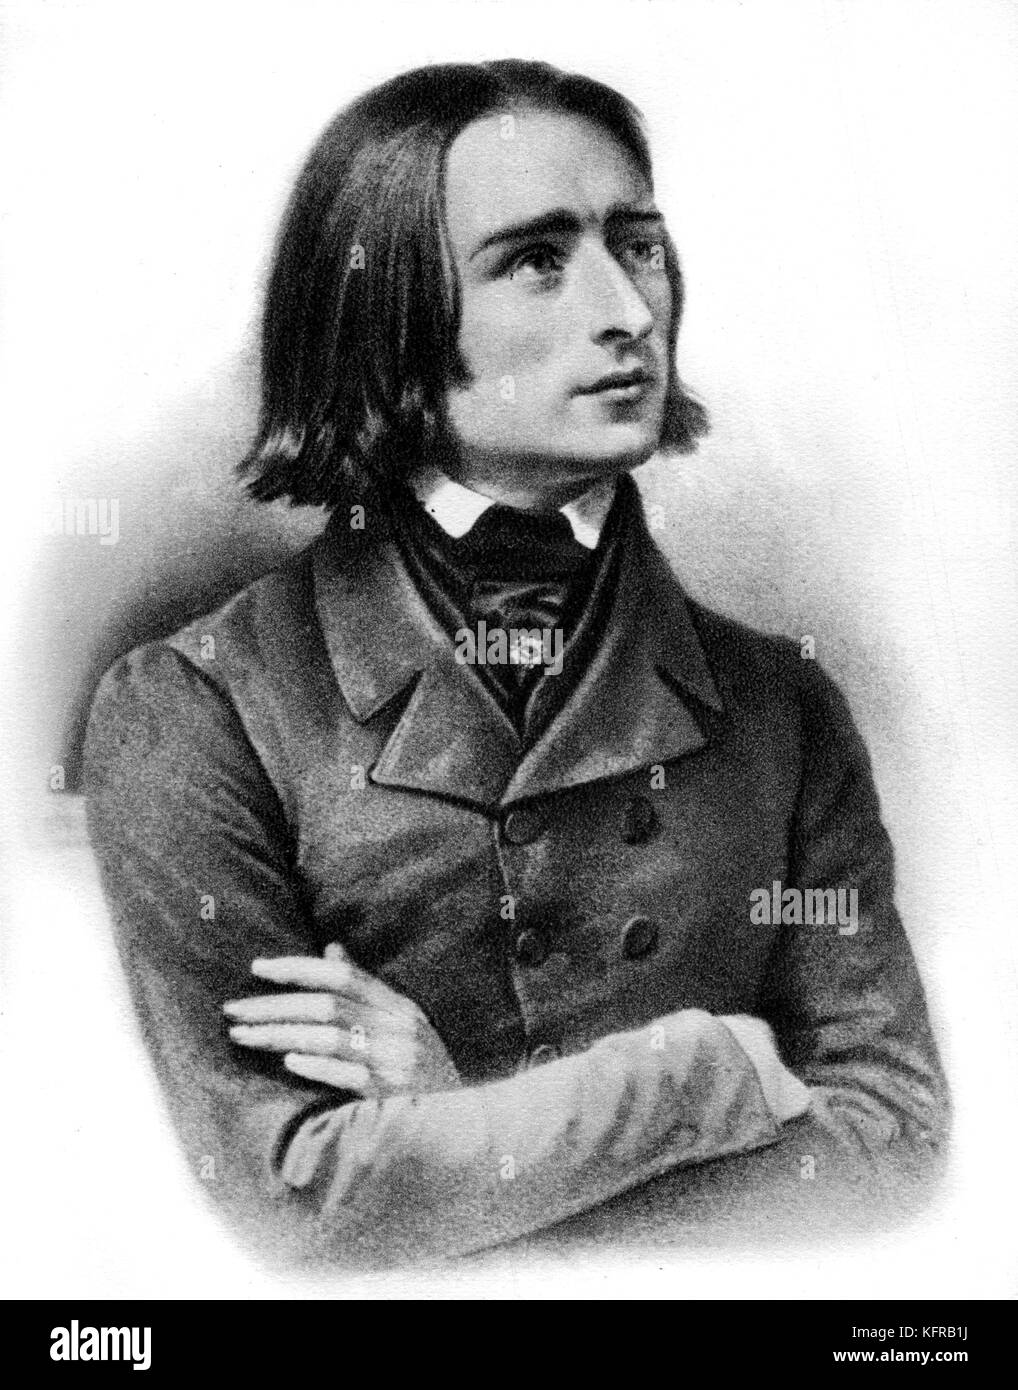 Franz Liszt - portrait, March 1842. After engraving by Mittag. Hungarian pianist and composer,  22 October 1811 - 31 July 1886. Stock Photo